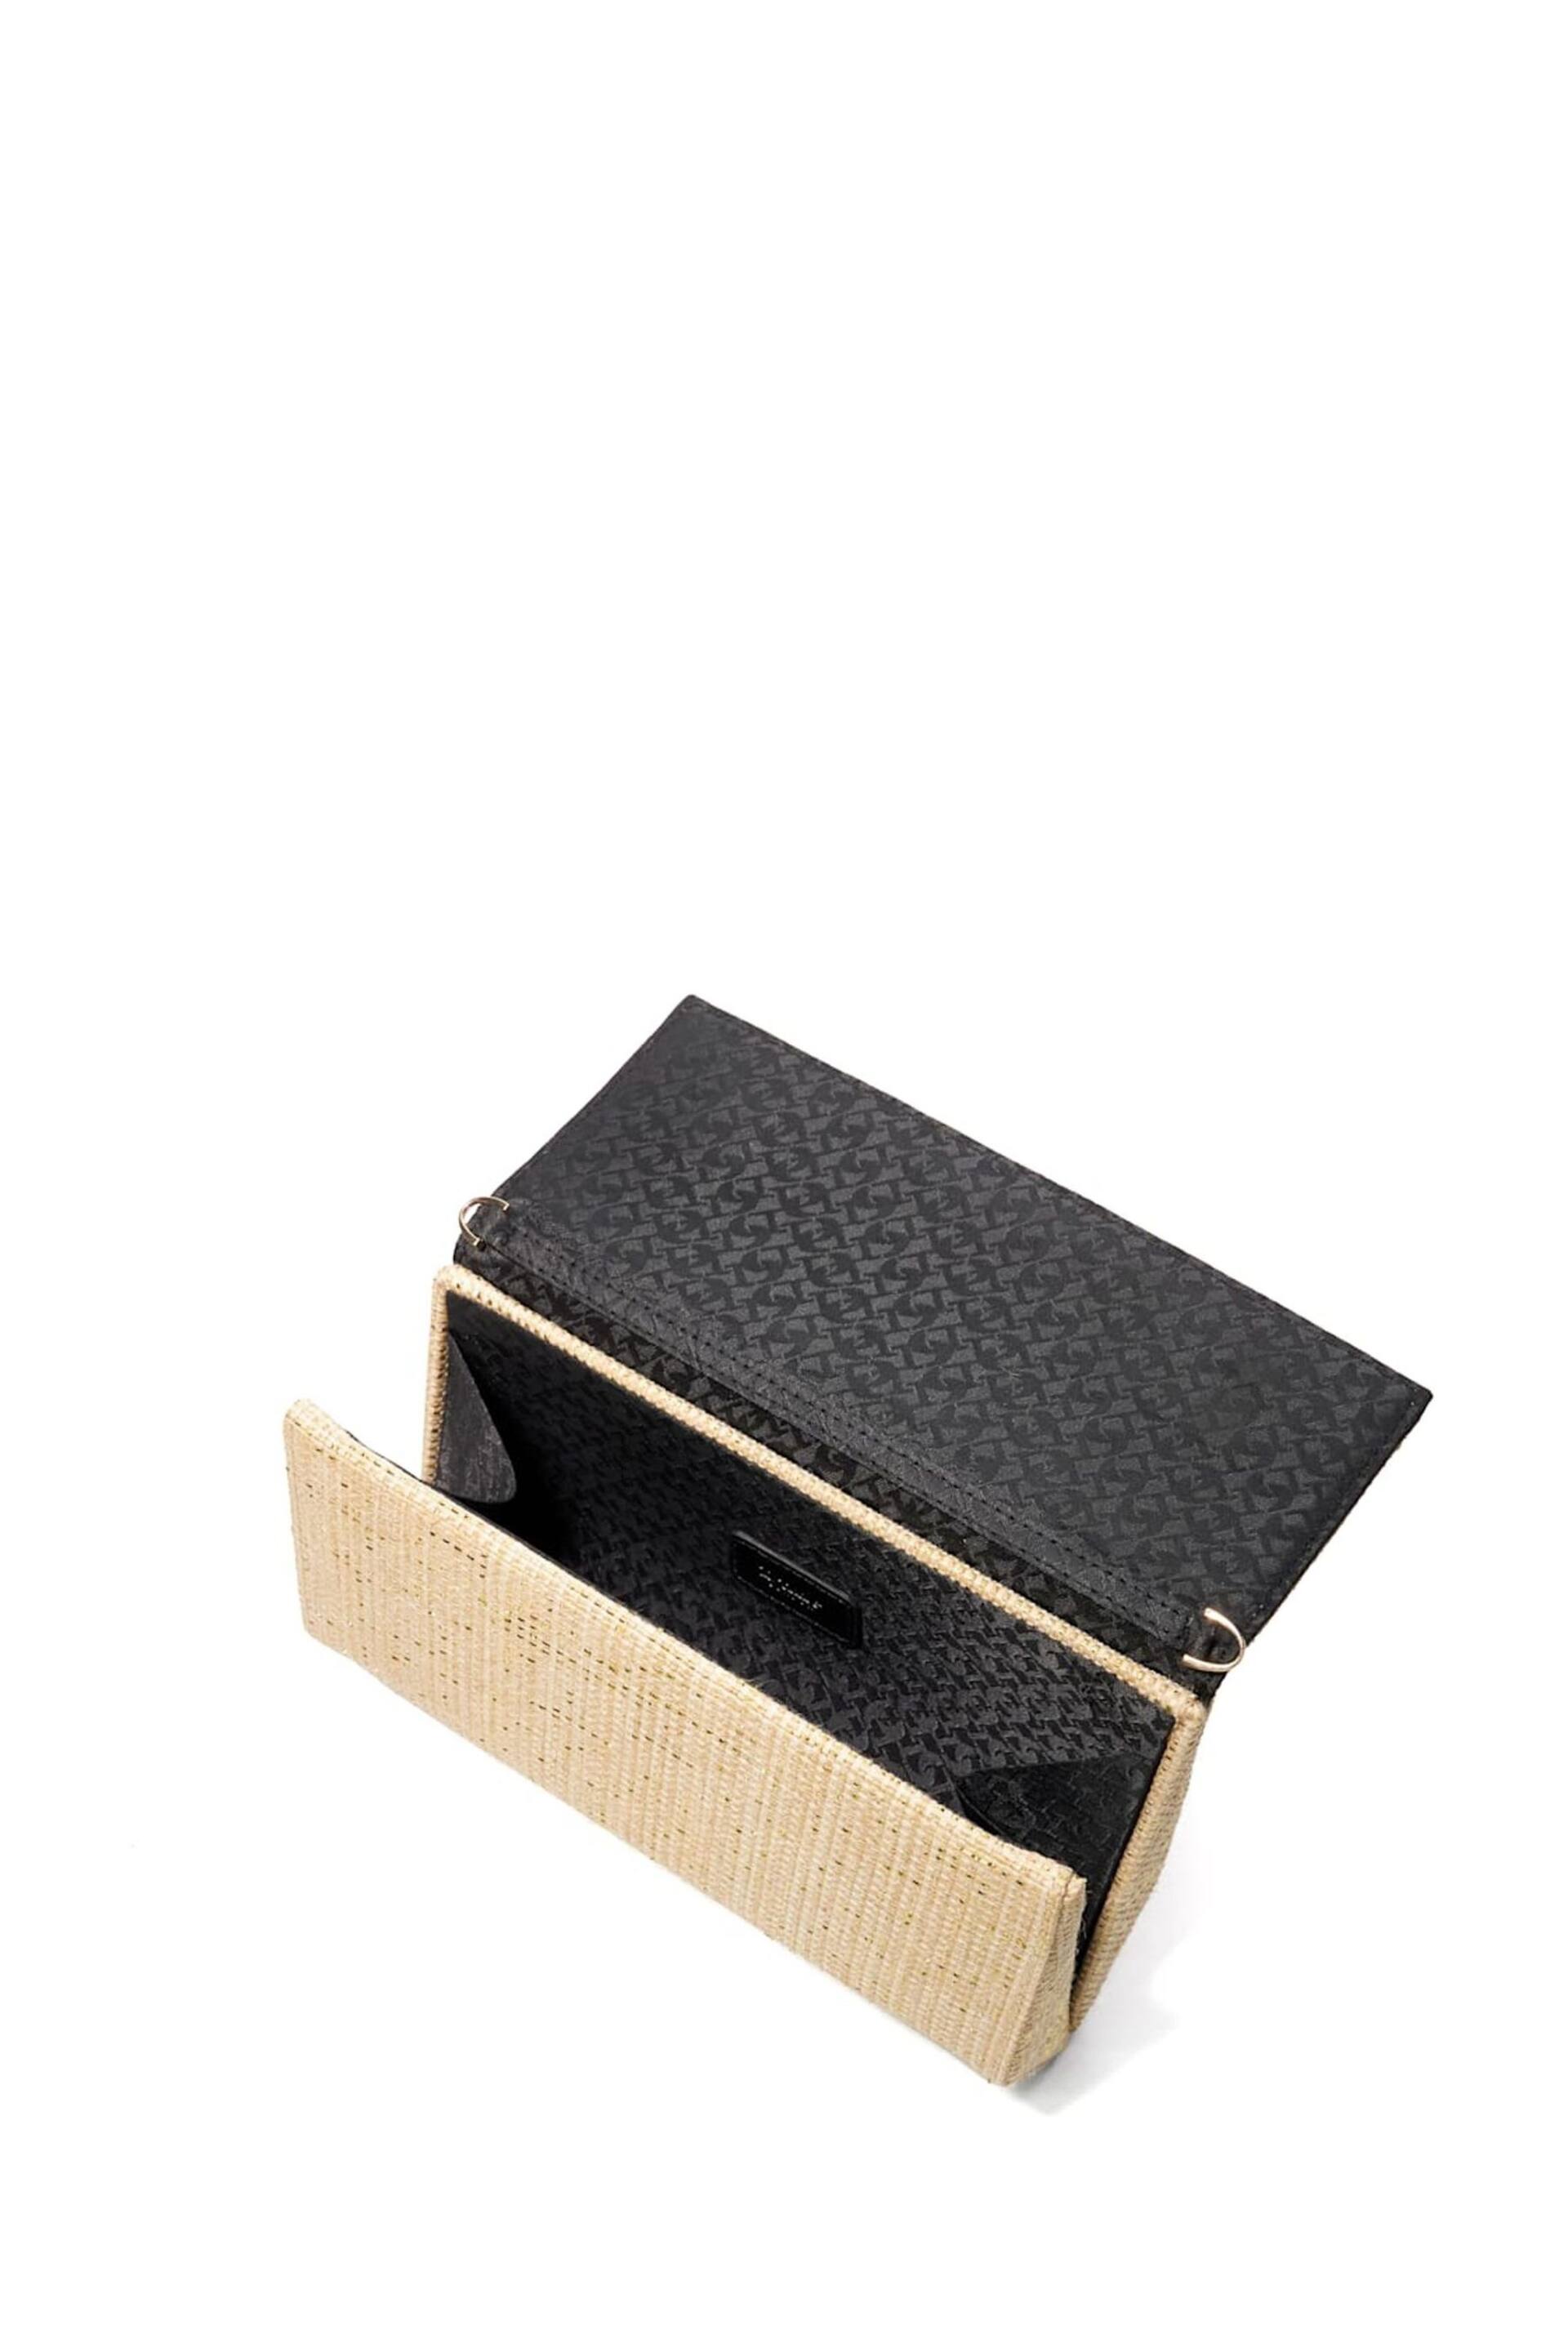 Dune London Gold Ballads Structured Foldover Clutch Bag - Image 4 of 5